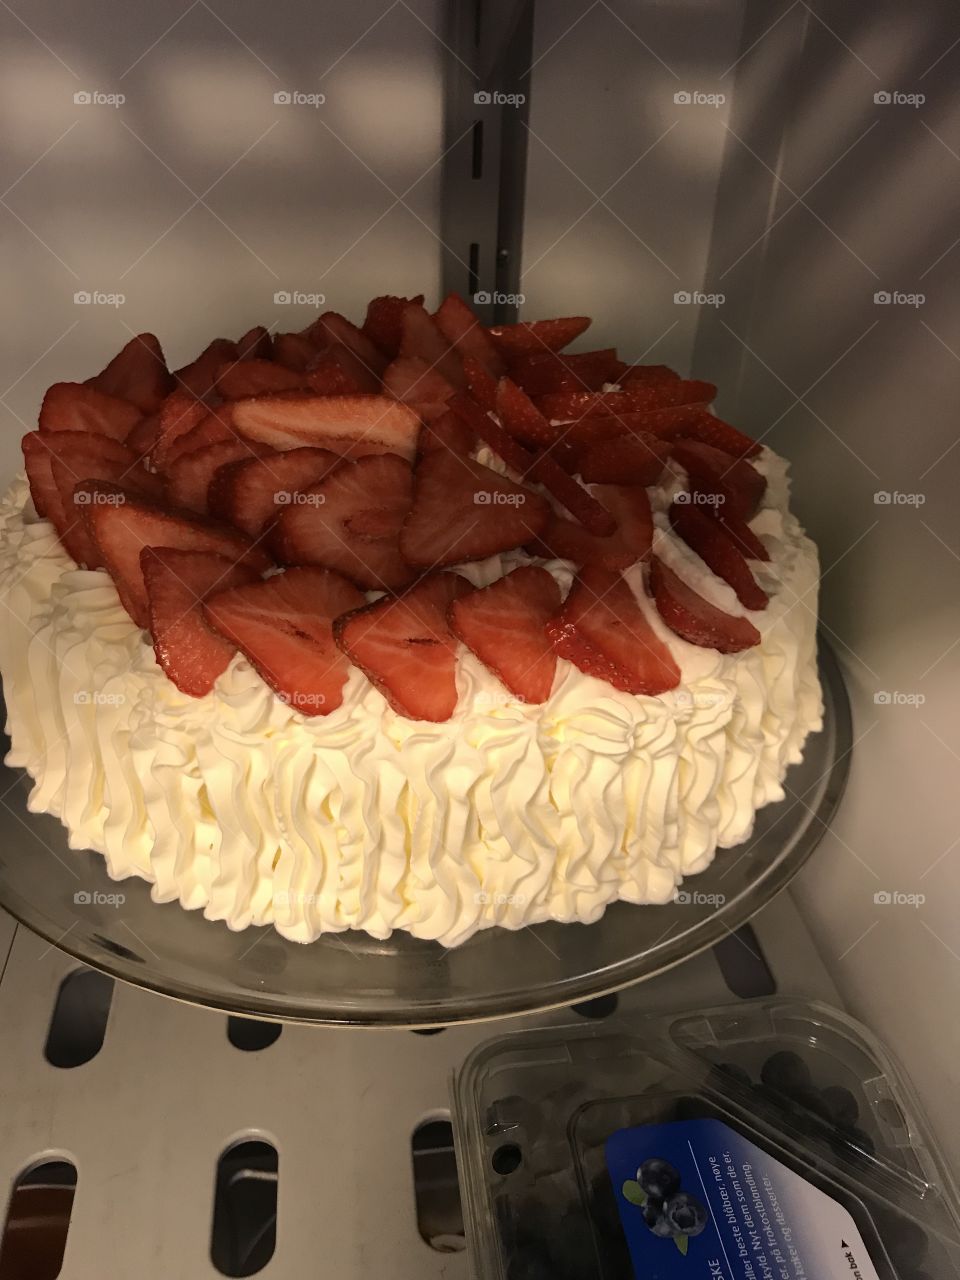 A white cream cake with some really red, nice strawberries on top. It tasted really good, and looked really good too. Dessert preparation for a group.